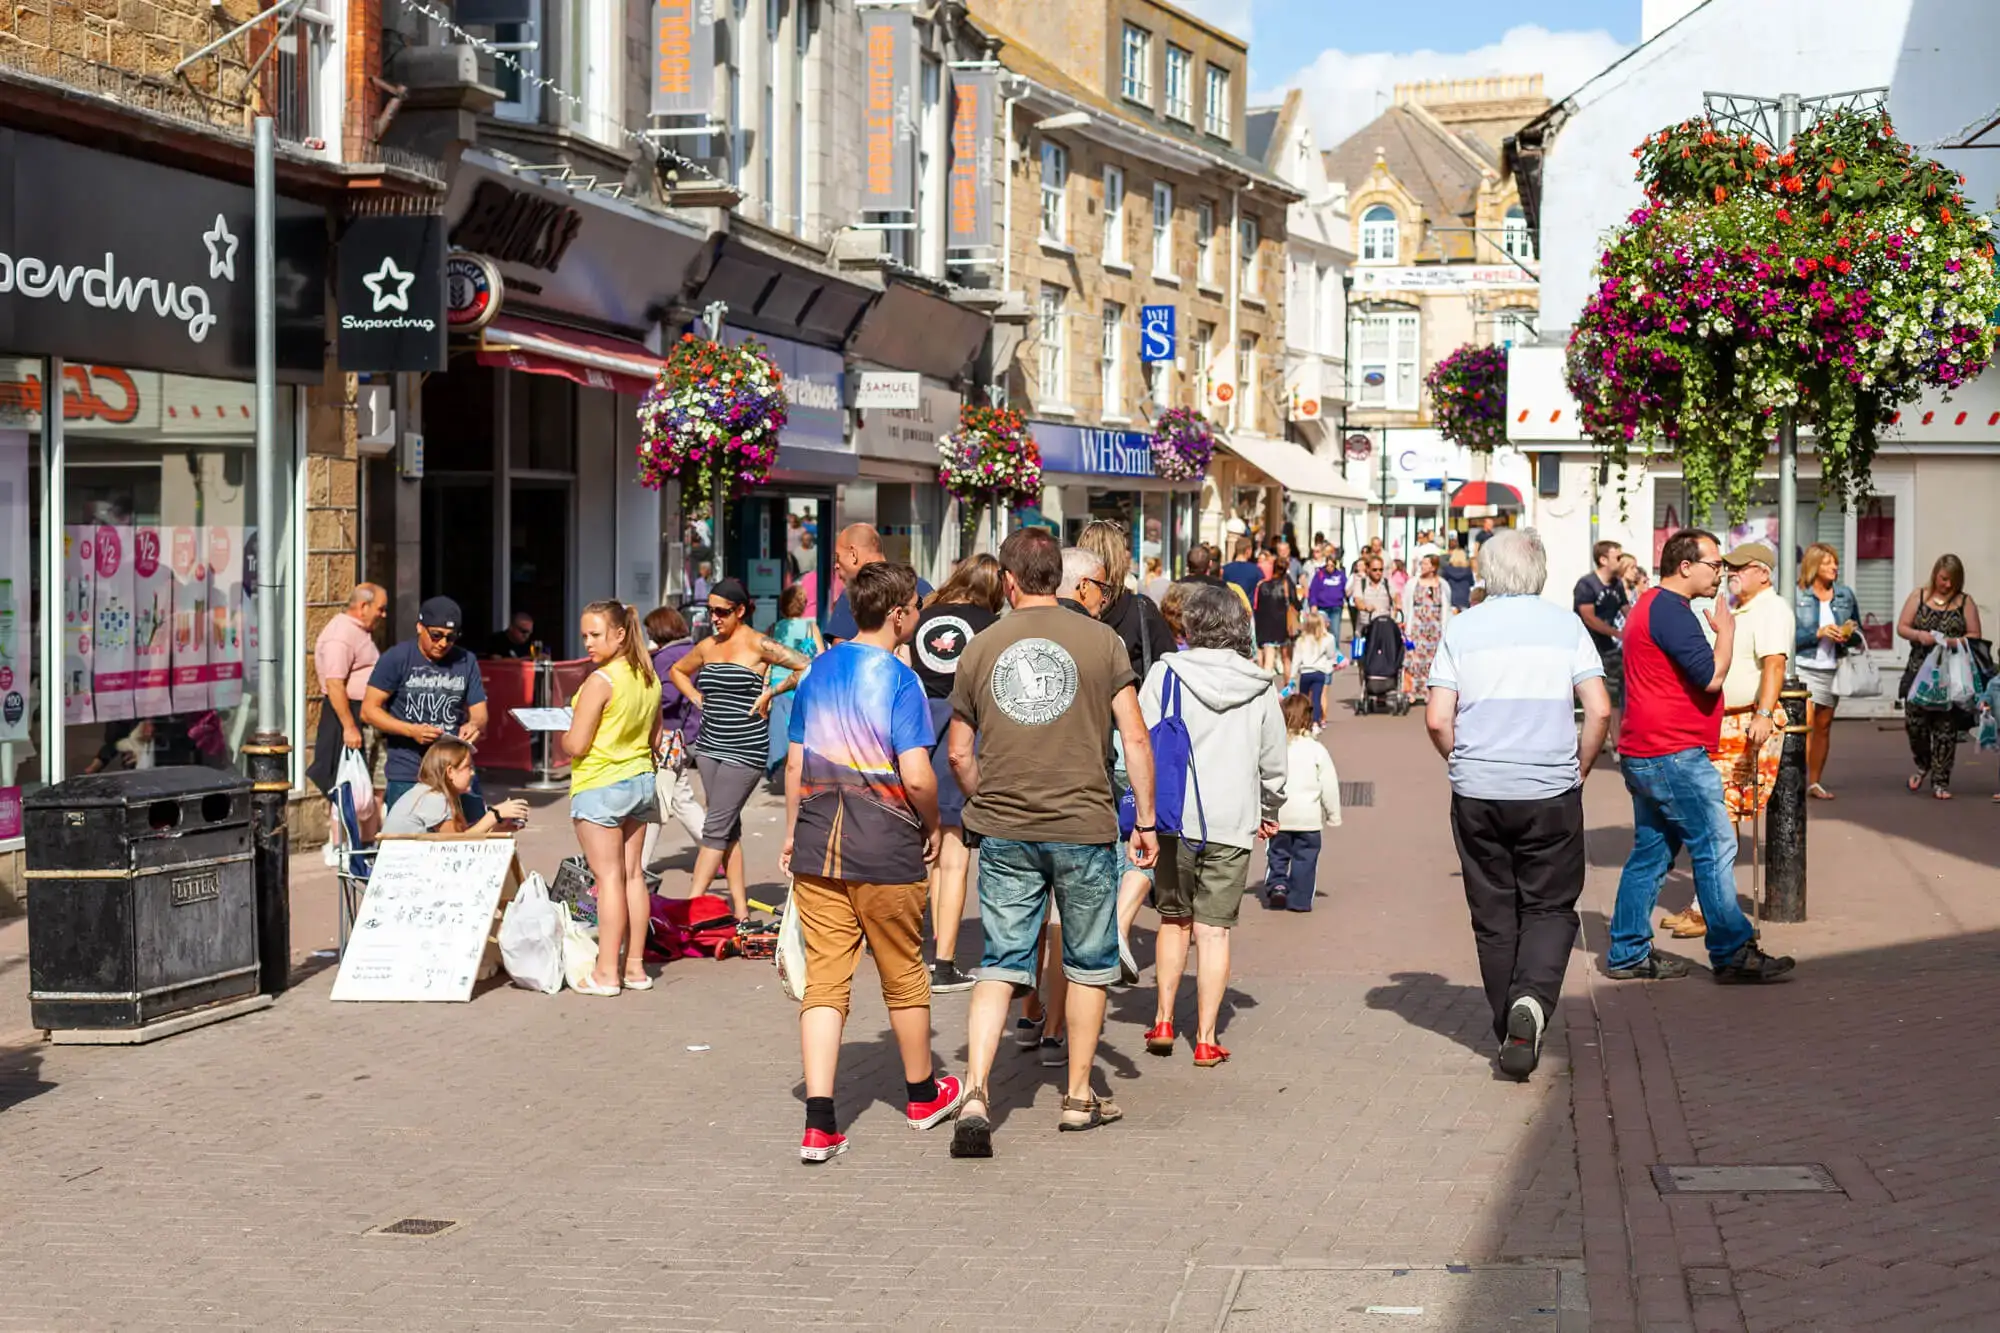 The busy Newquay high street, with shops and shoppers on a sunny day